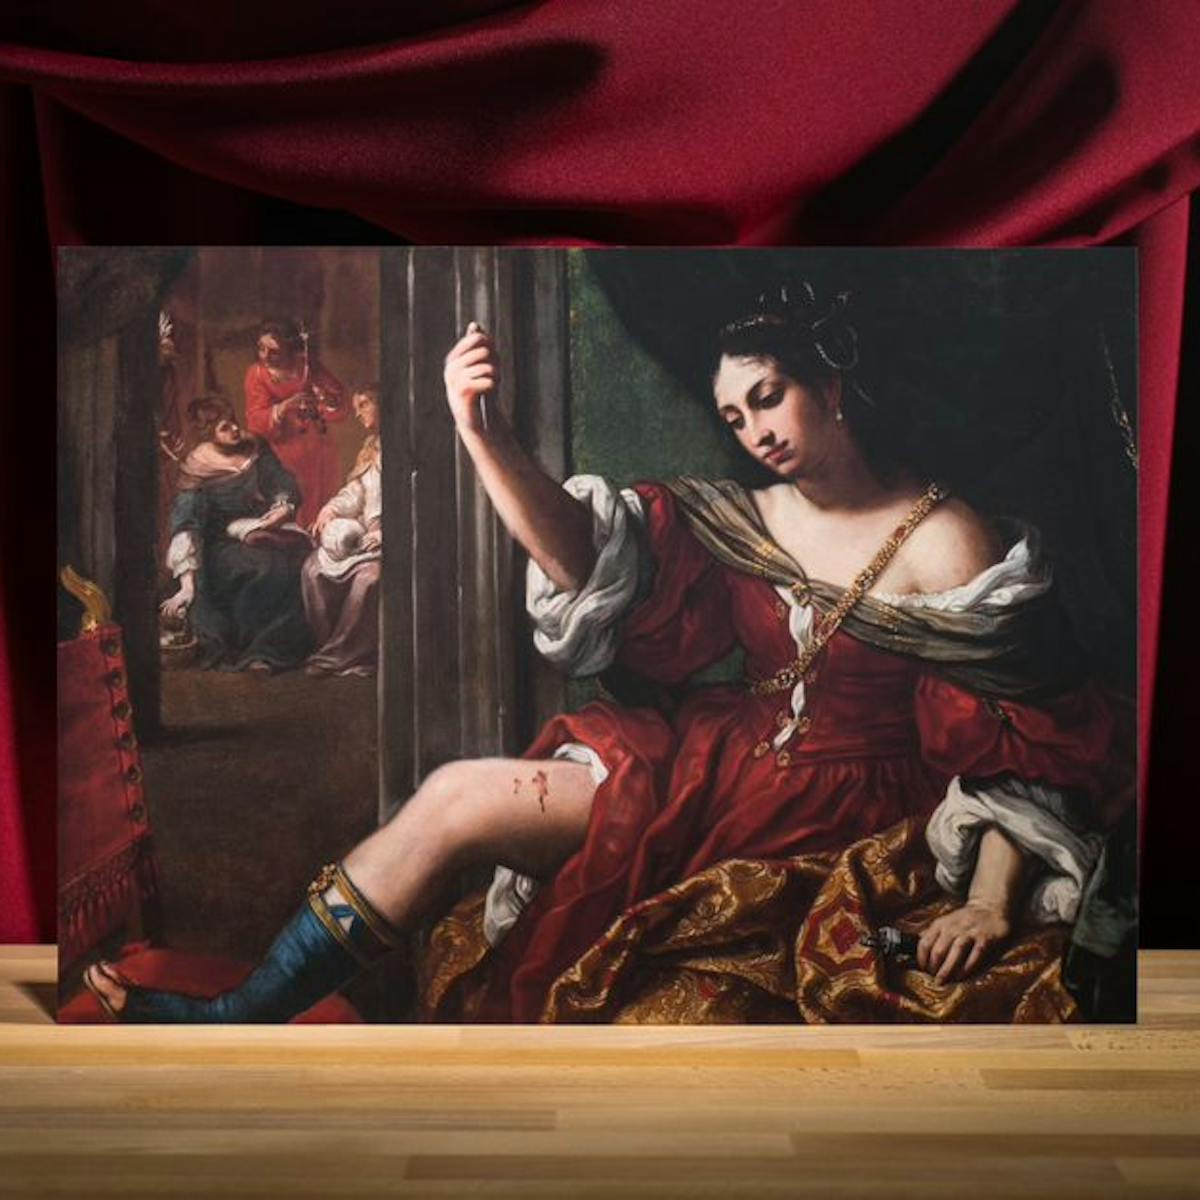 Photograph of an oil on canvas painting of a woman raising her hand and holding up a knife towards her exposed thigh. Her thigh is wounded and blood is coming out of the wounded sight. She is wearing a grand red dress and a grand looking necklace. 